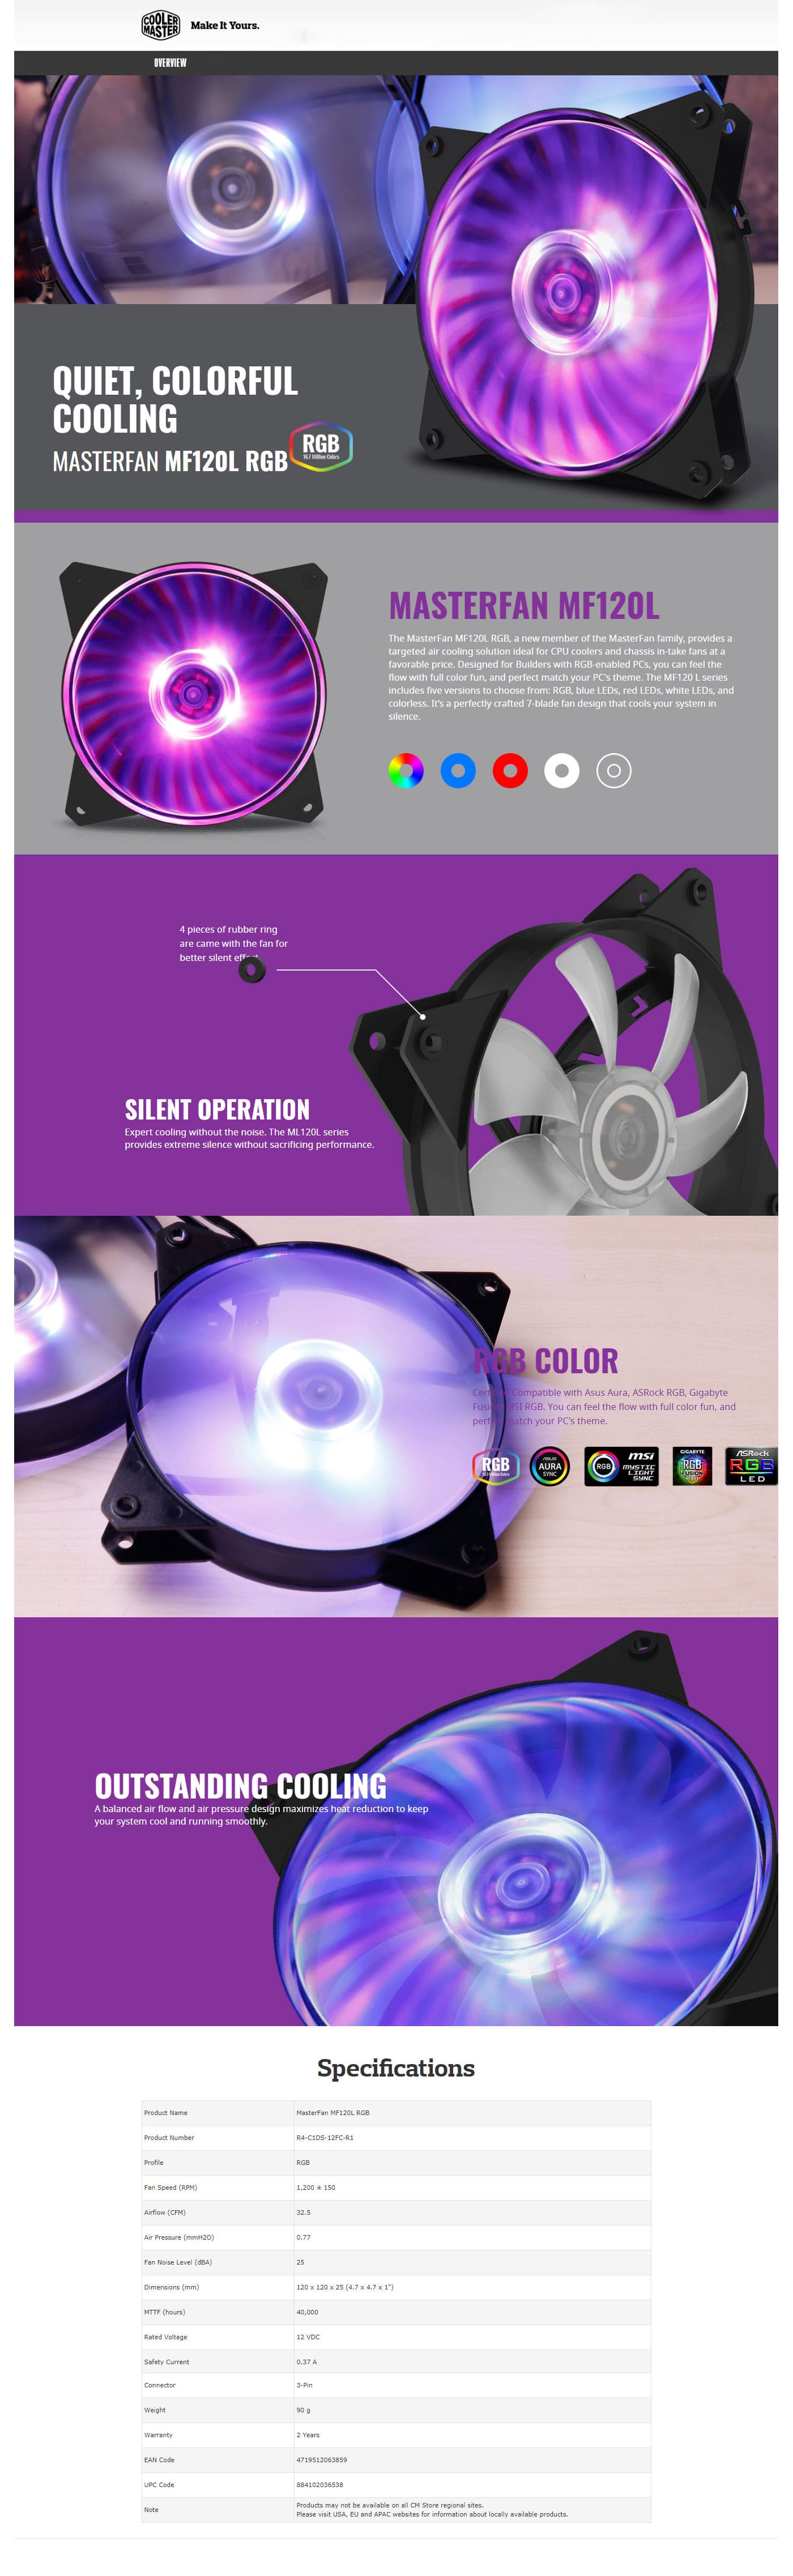 Cooler Master MasterFan MF120L RGB 120mm features